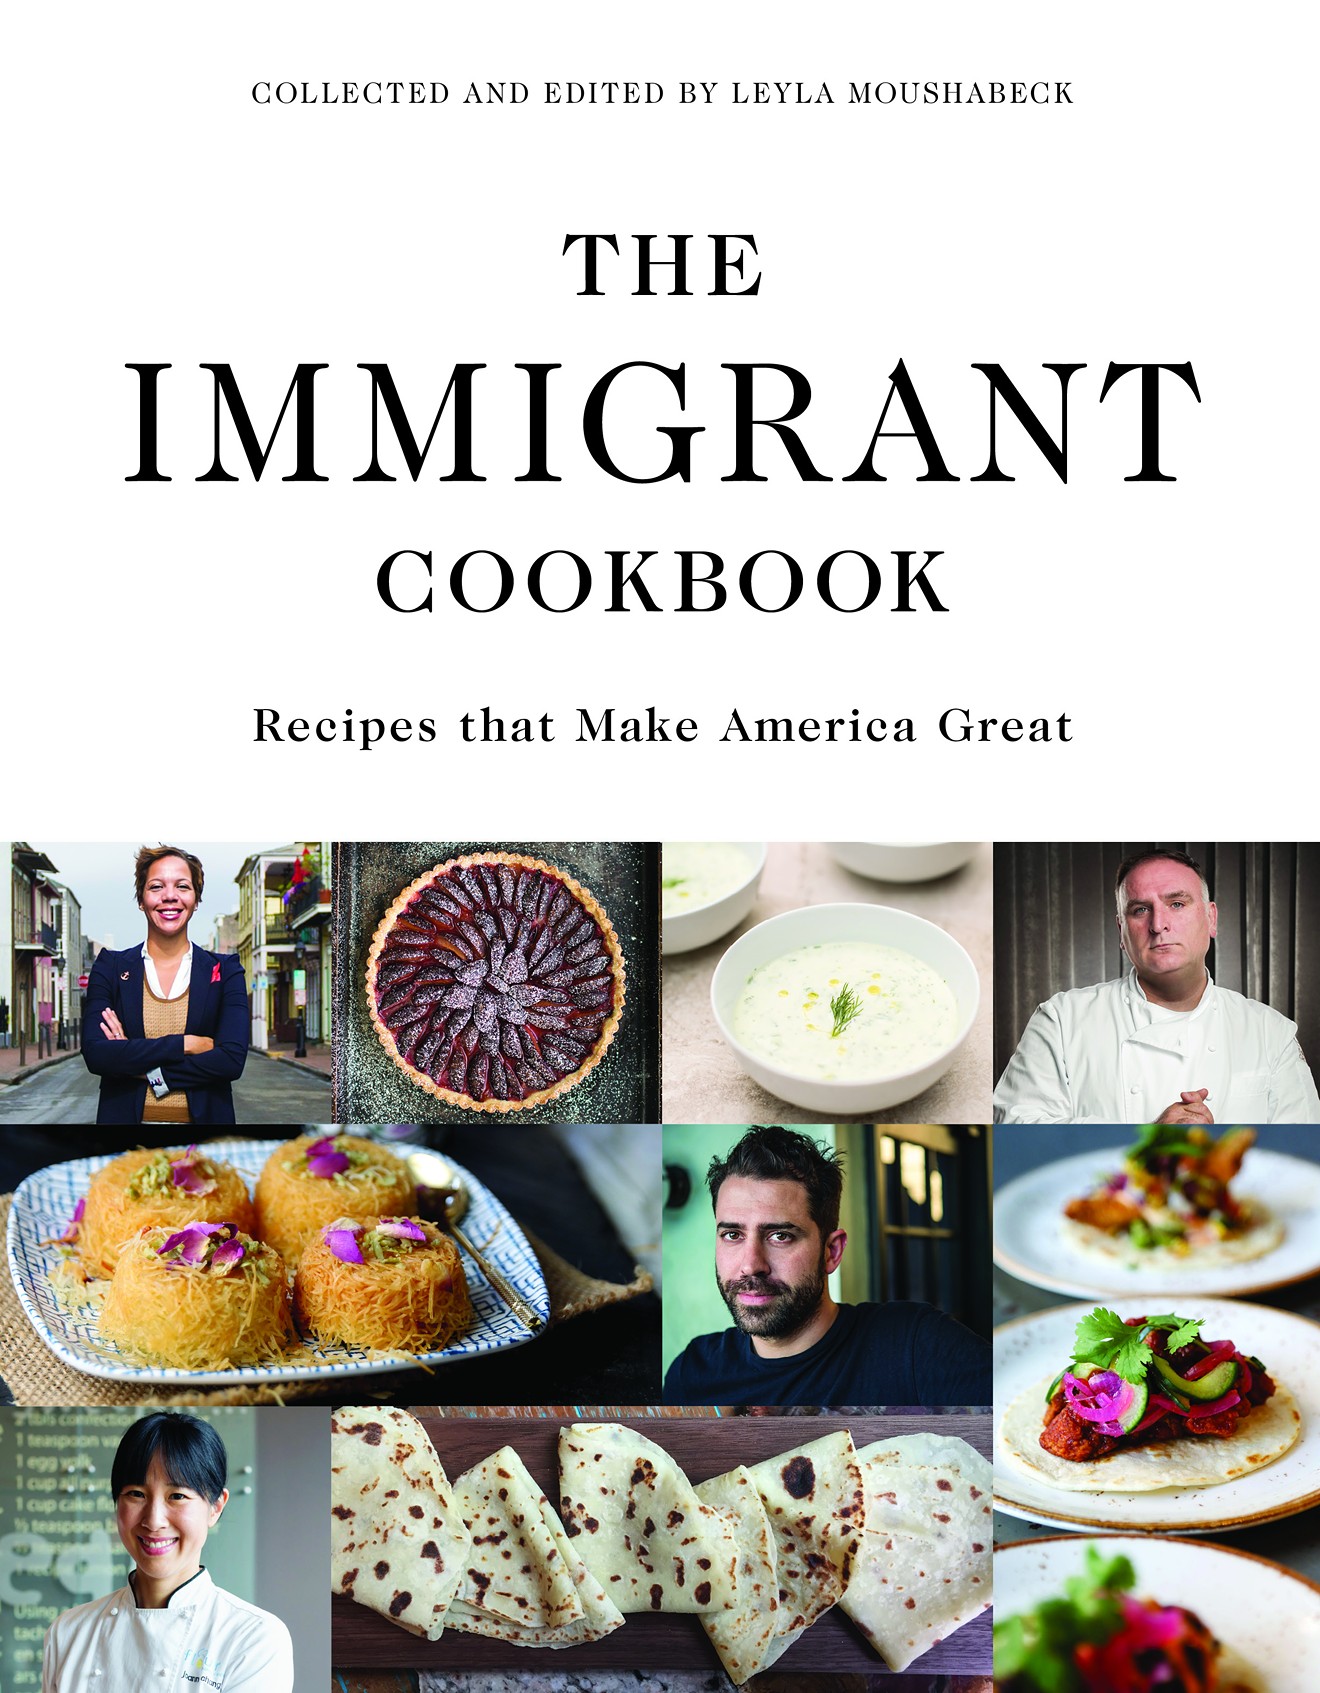 The Immigrant Cookbook celebrates the many people who make America great.